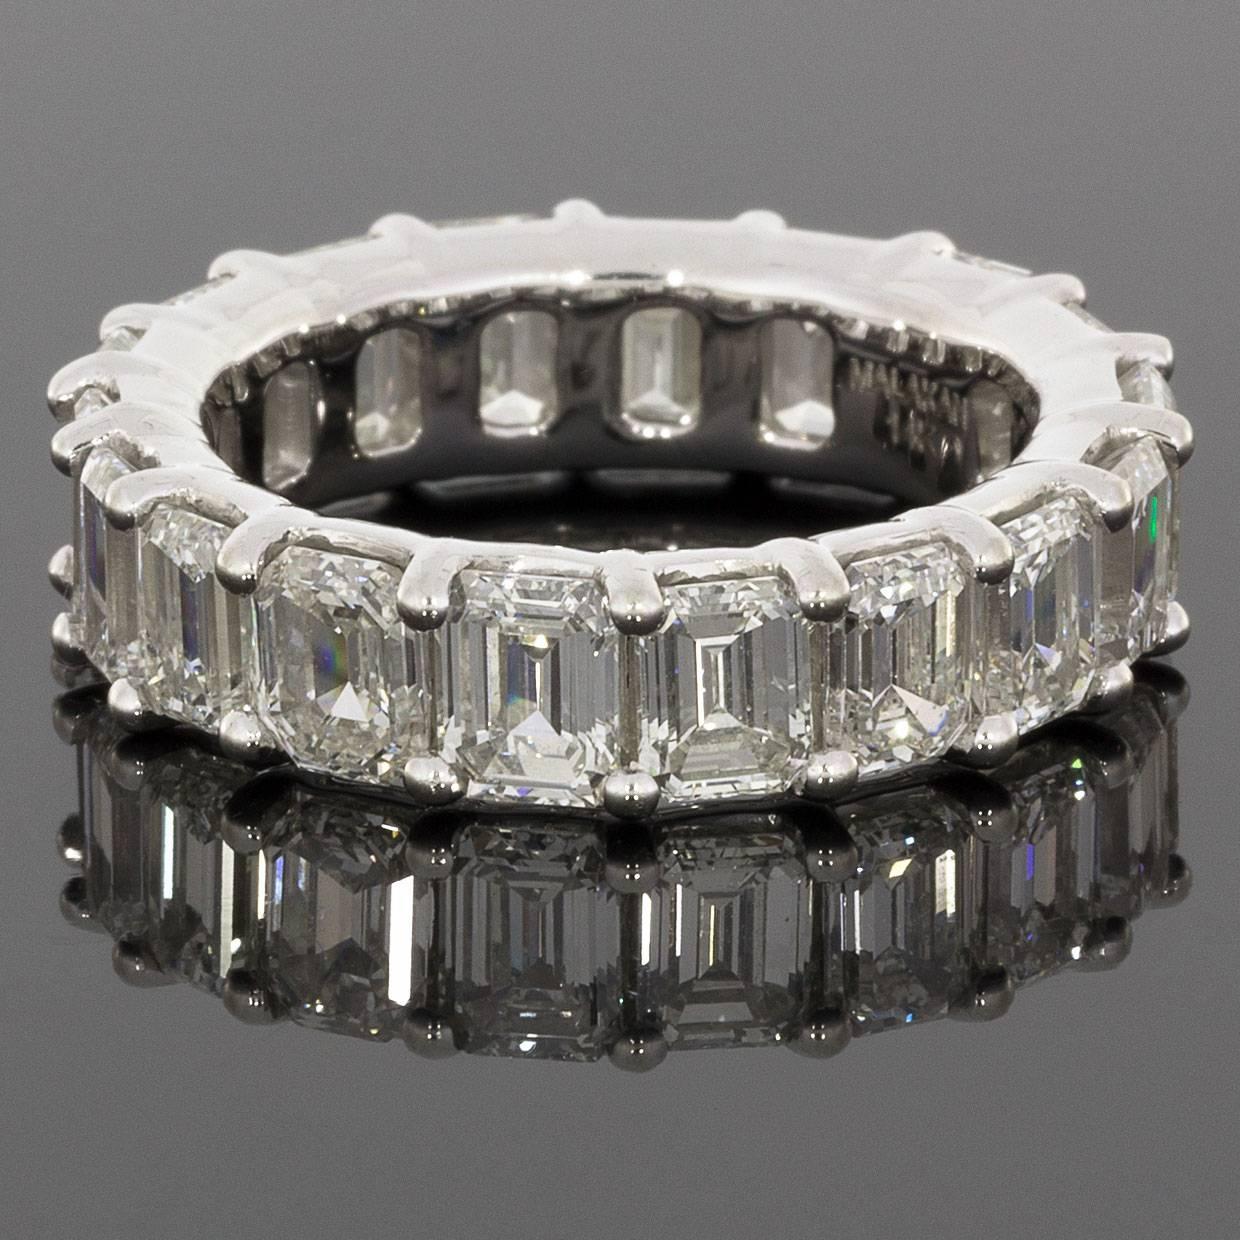 This absolutely stunning band is a classic prong set, diamond eternity band featuring 18 beautiful emerald cut diamonds. Trading the sparkle and fire of a traditional brilliant-cut stone, emerald cut diamonds instead offer a dramatic hall-of-mirrors